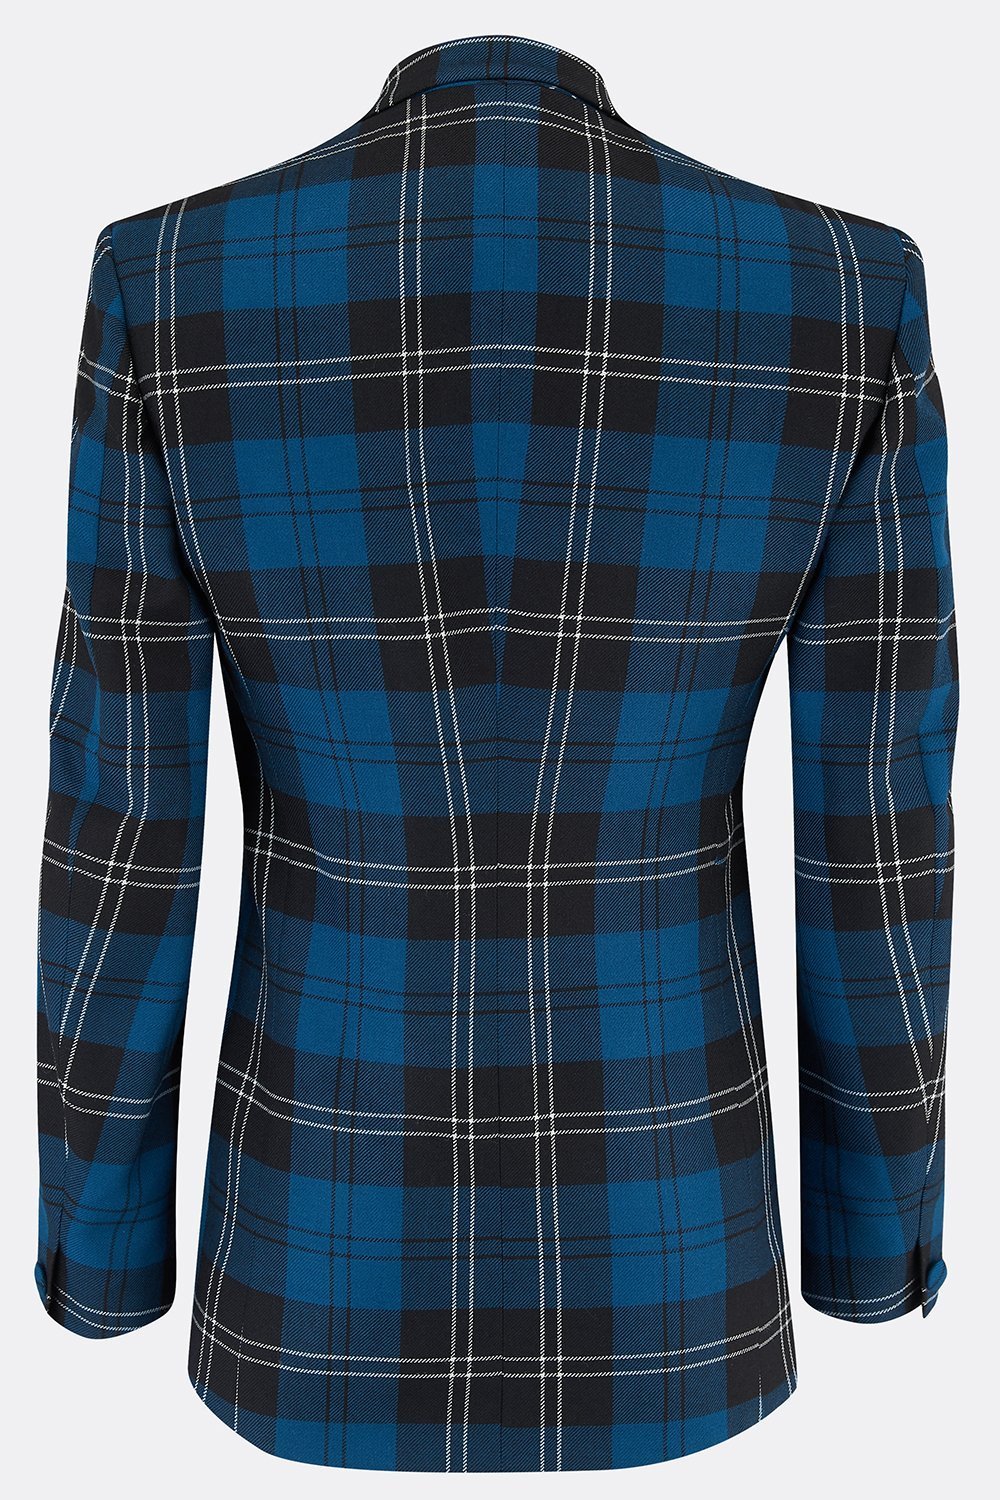 LEYBOURNE JACKET IN BLUE CHECK (made to order)-menswear-A Child Of The Jago